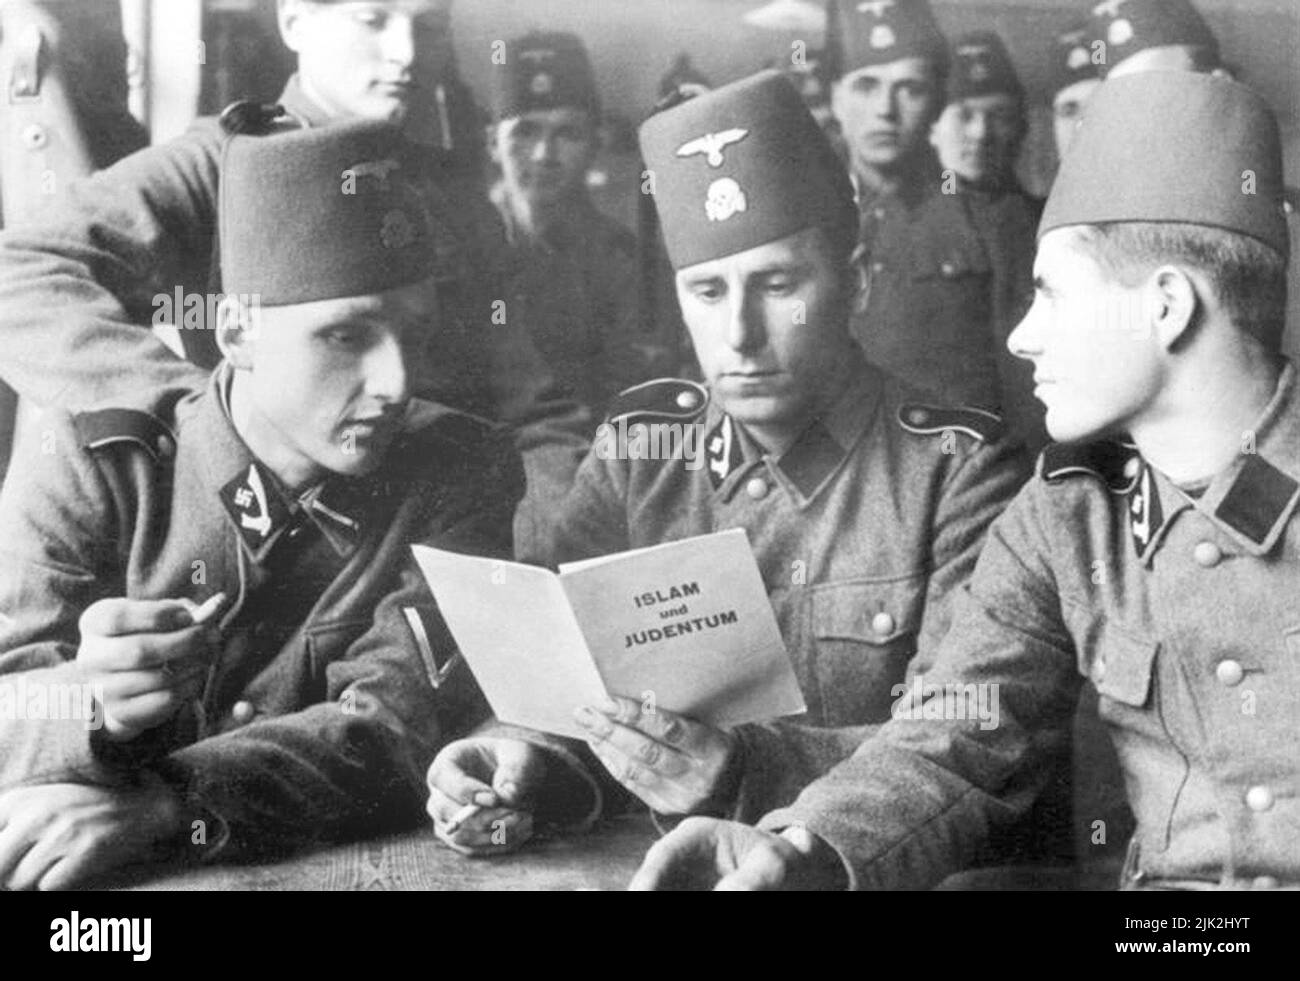 Soldiers of the 13th SS Division of the SS Handschar (1st Croatian) with a brochure about 'Islam and Judaism', 1943 Stock Photo